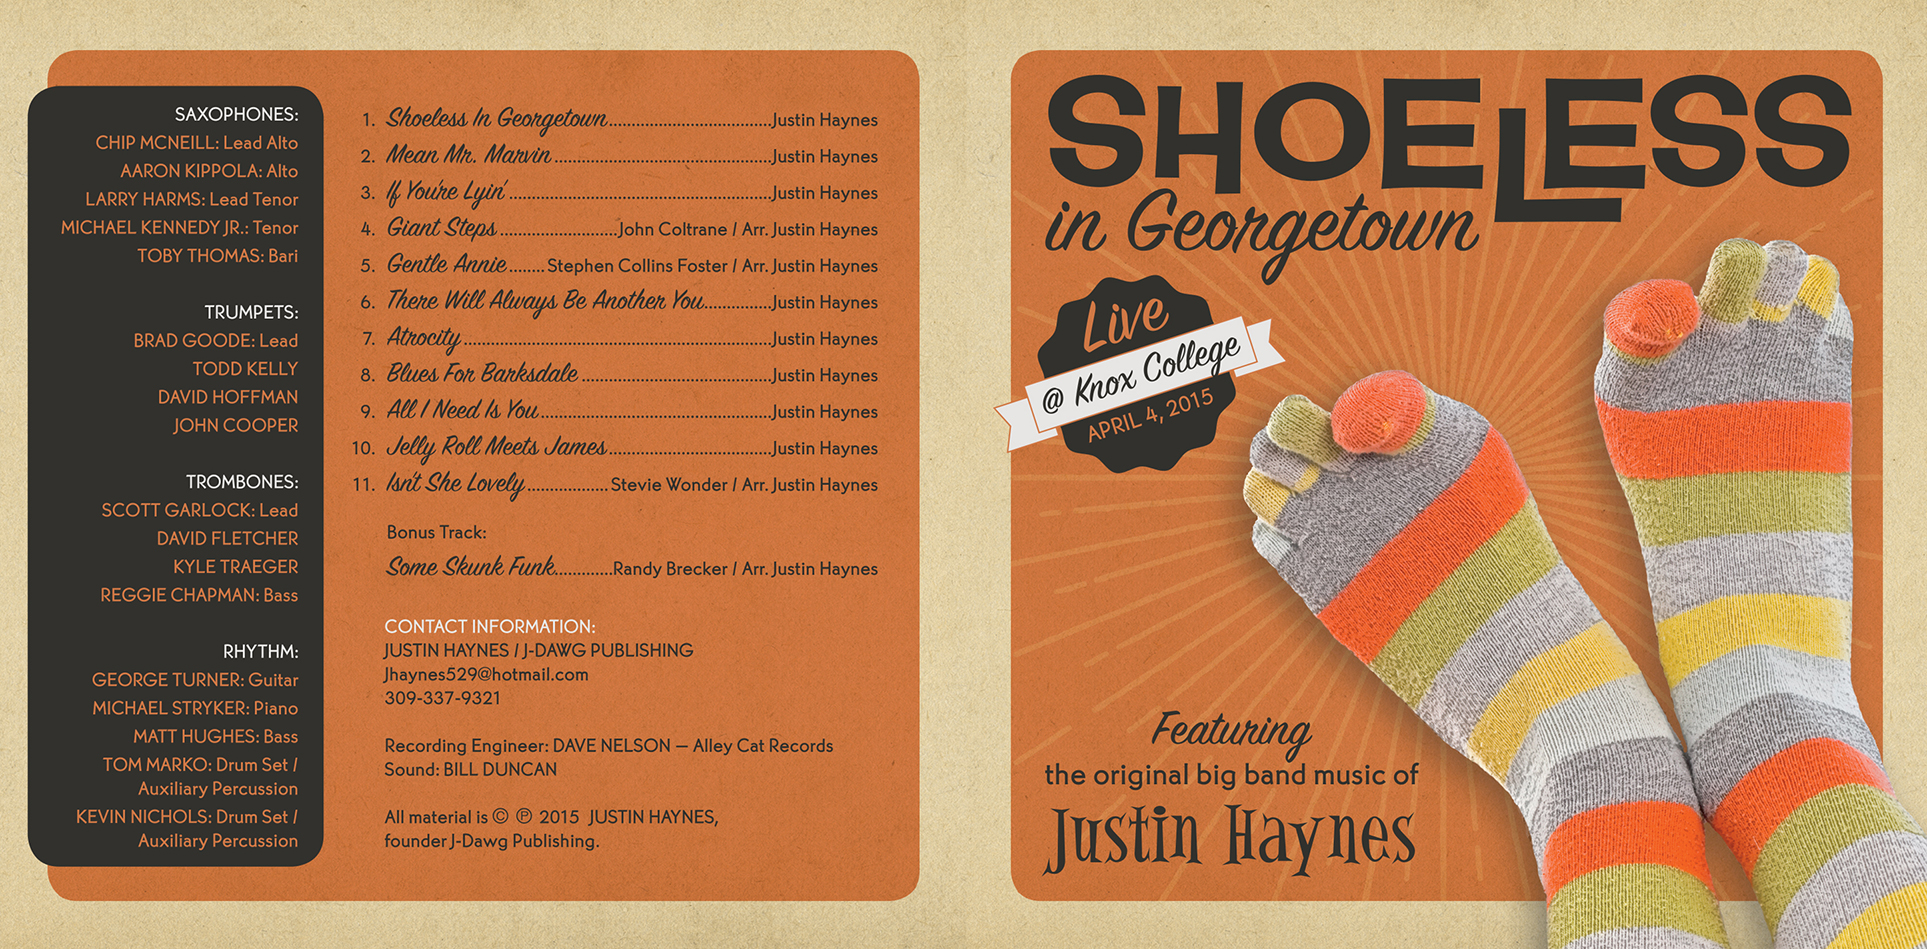 Outside of CD mini-jacket for Shoeless in Georgetown by Justin Haynes.